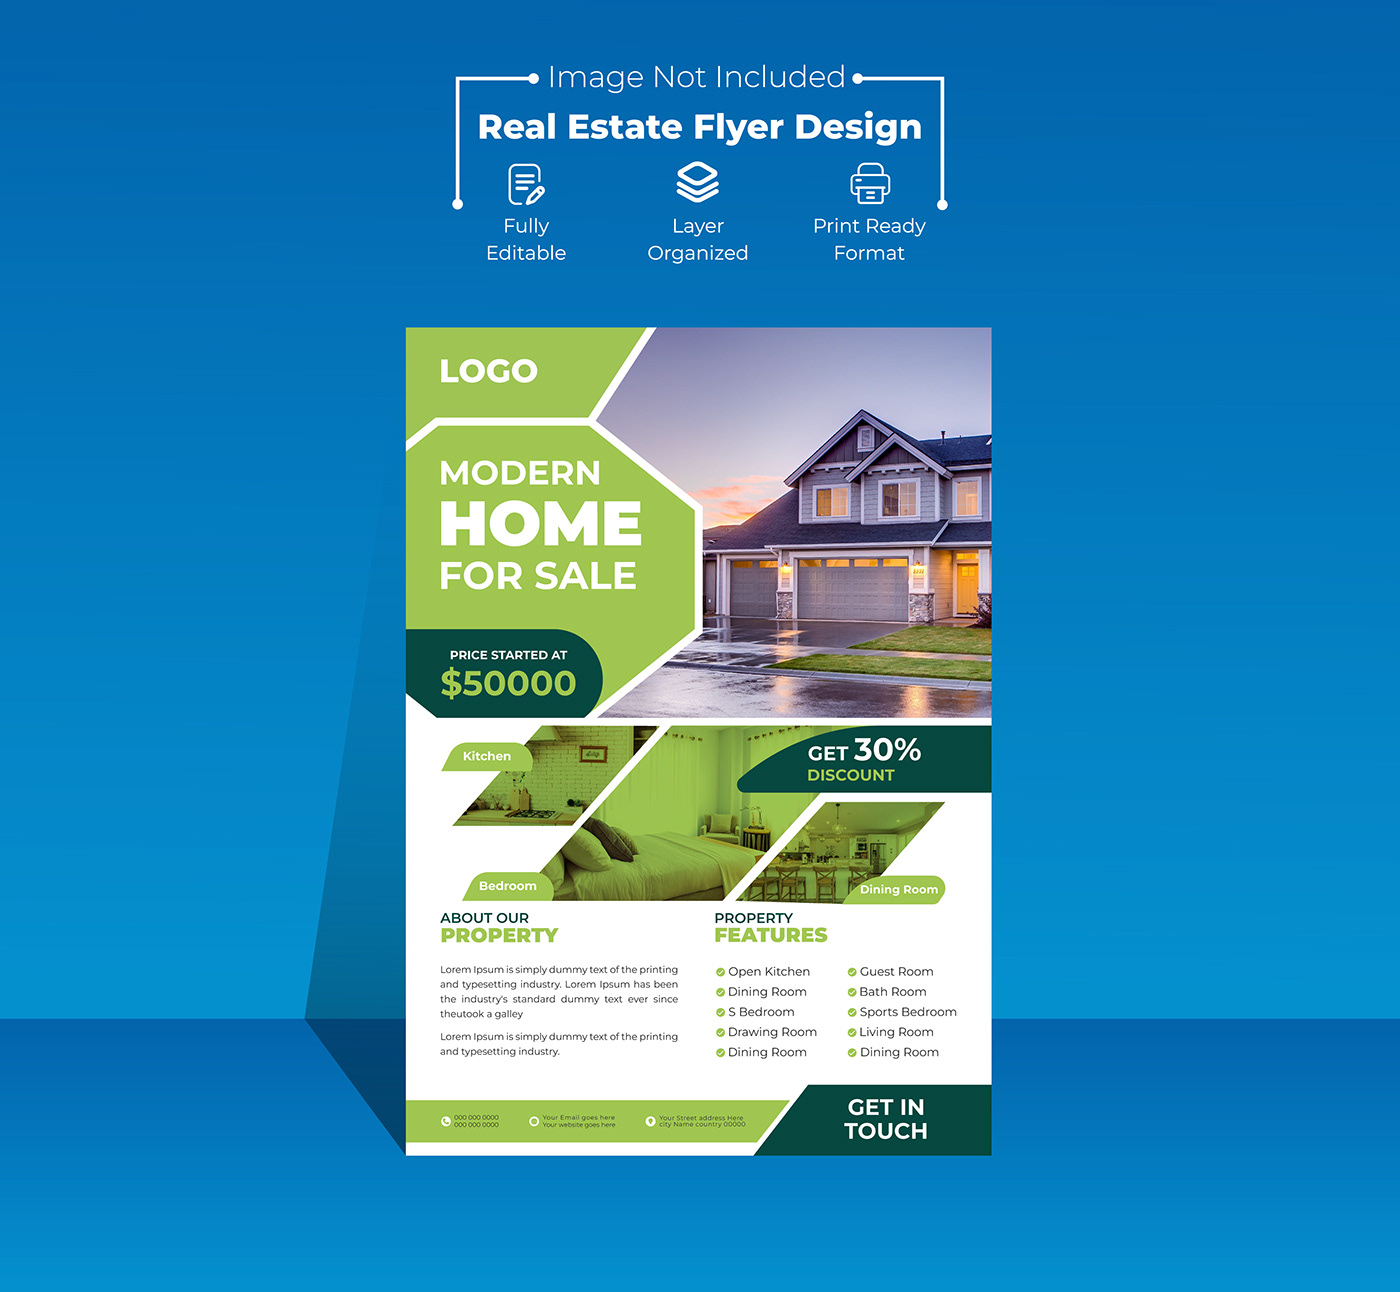 The purpose of real estate flyer design is to showcase properties effectively.